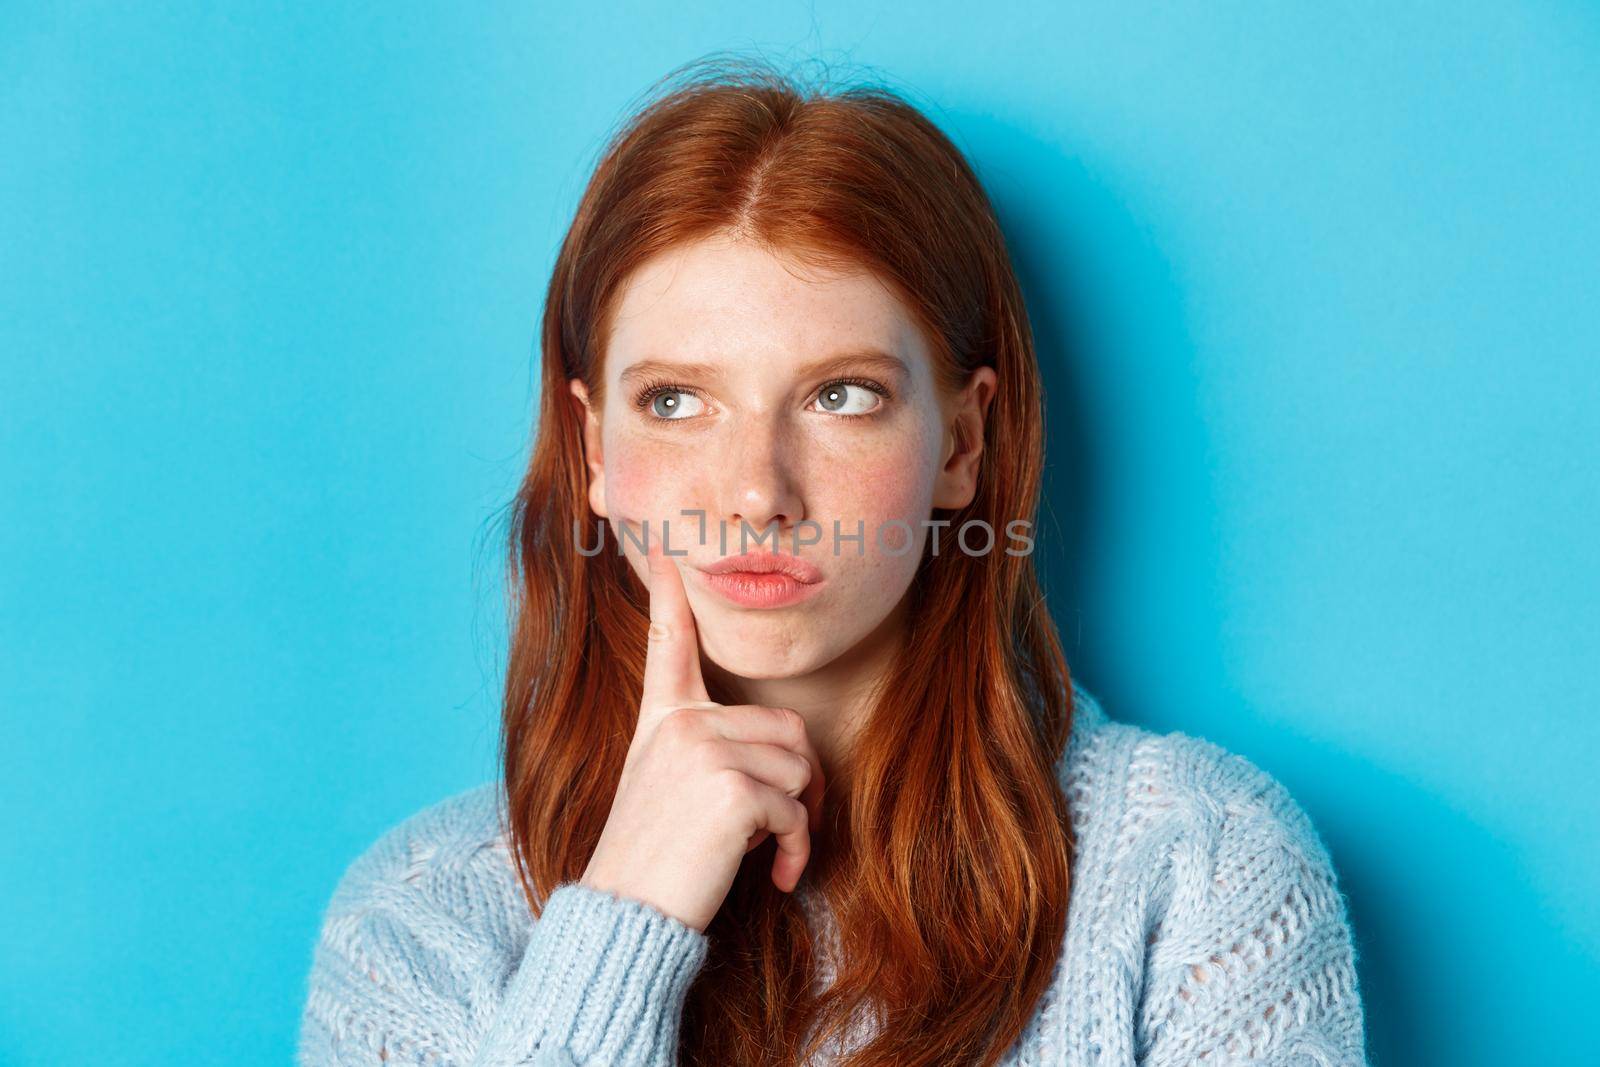 Headshot of troubled teenage girl thinking, looking bothered and frowning, standing against blue background.